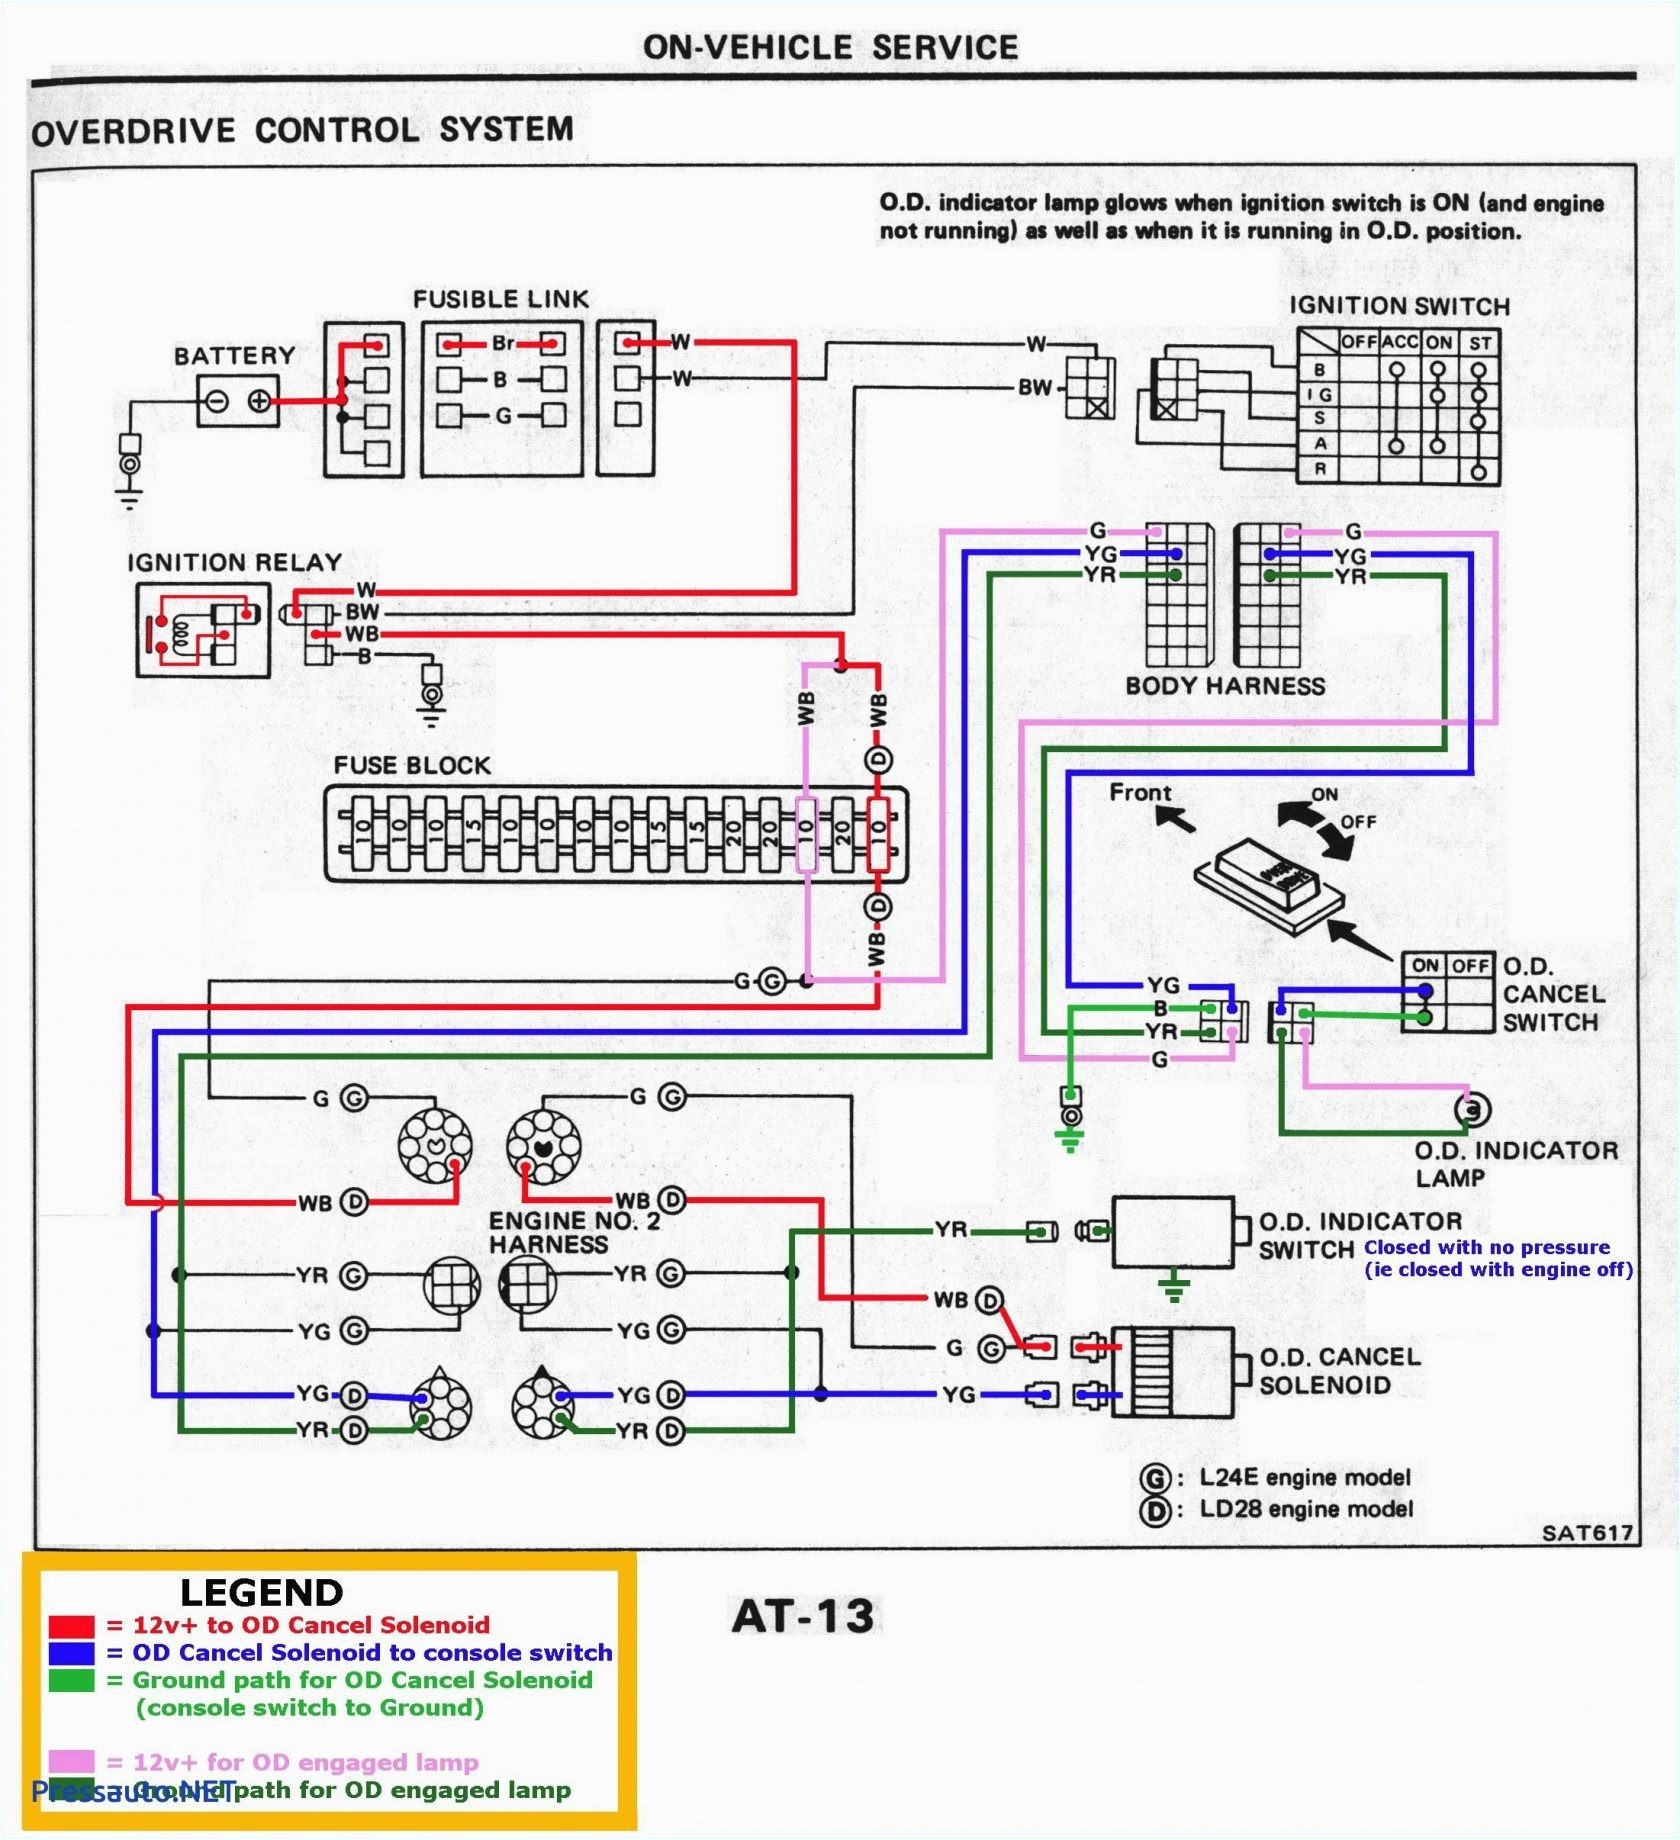 bose link cable wiring diagram wiring diagram mega bose lifestyle 650 wiring diagram